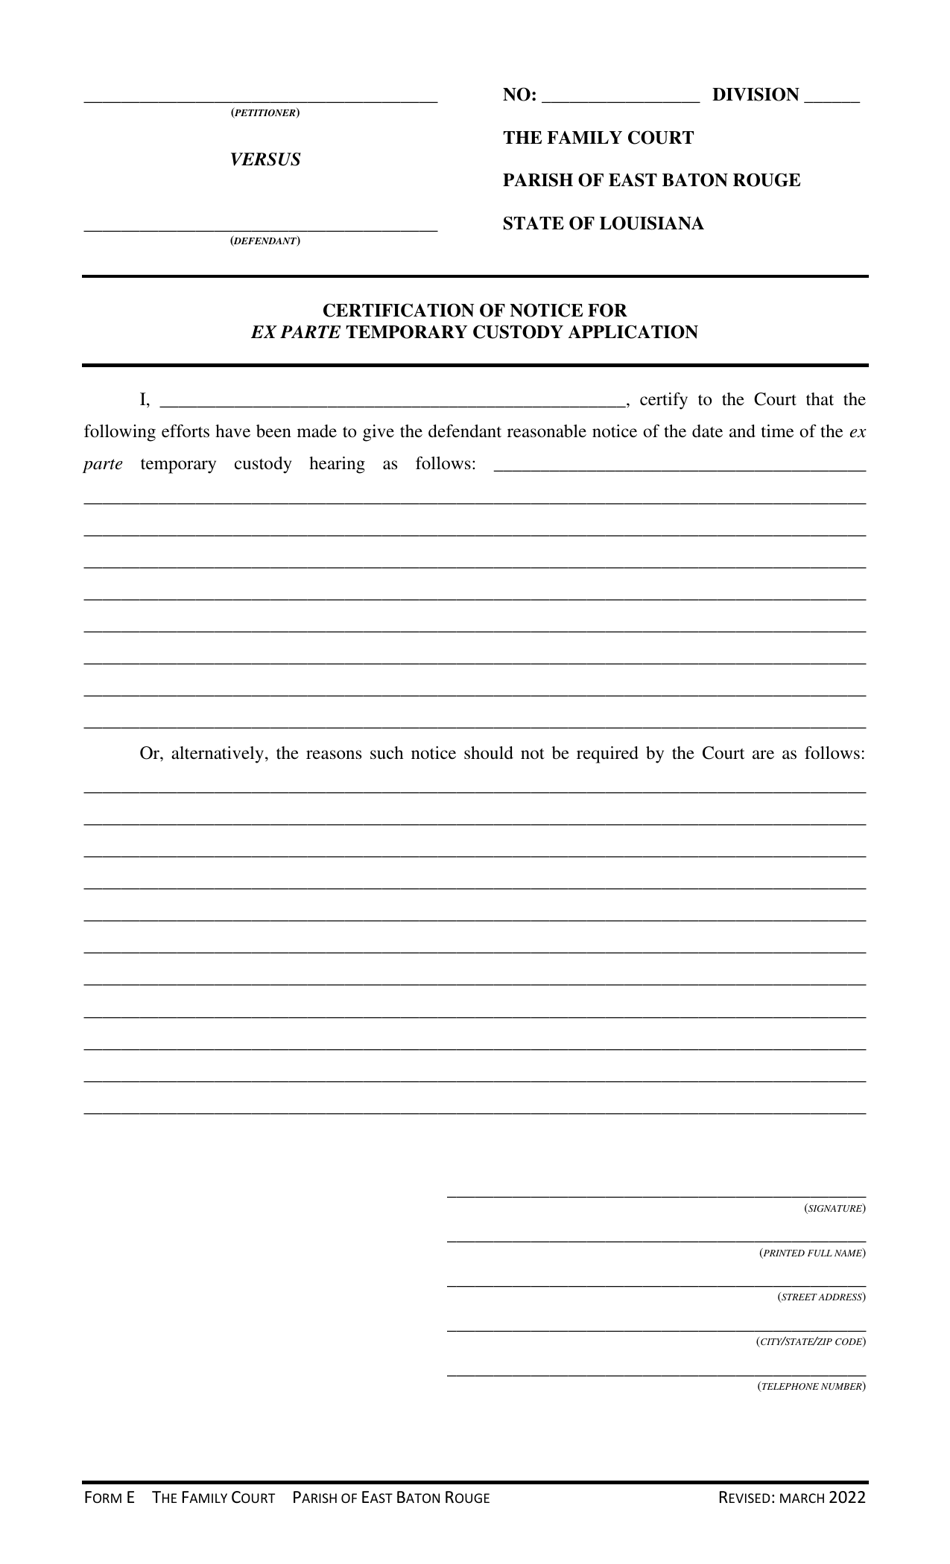 Form F Certification of Notice for Ex Parte Temporary Custody Application - Parish of East Baton Rouge, Louisiana, Page 1